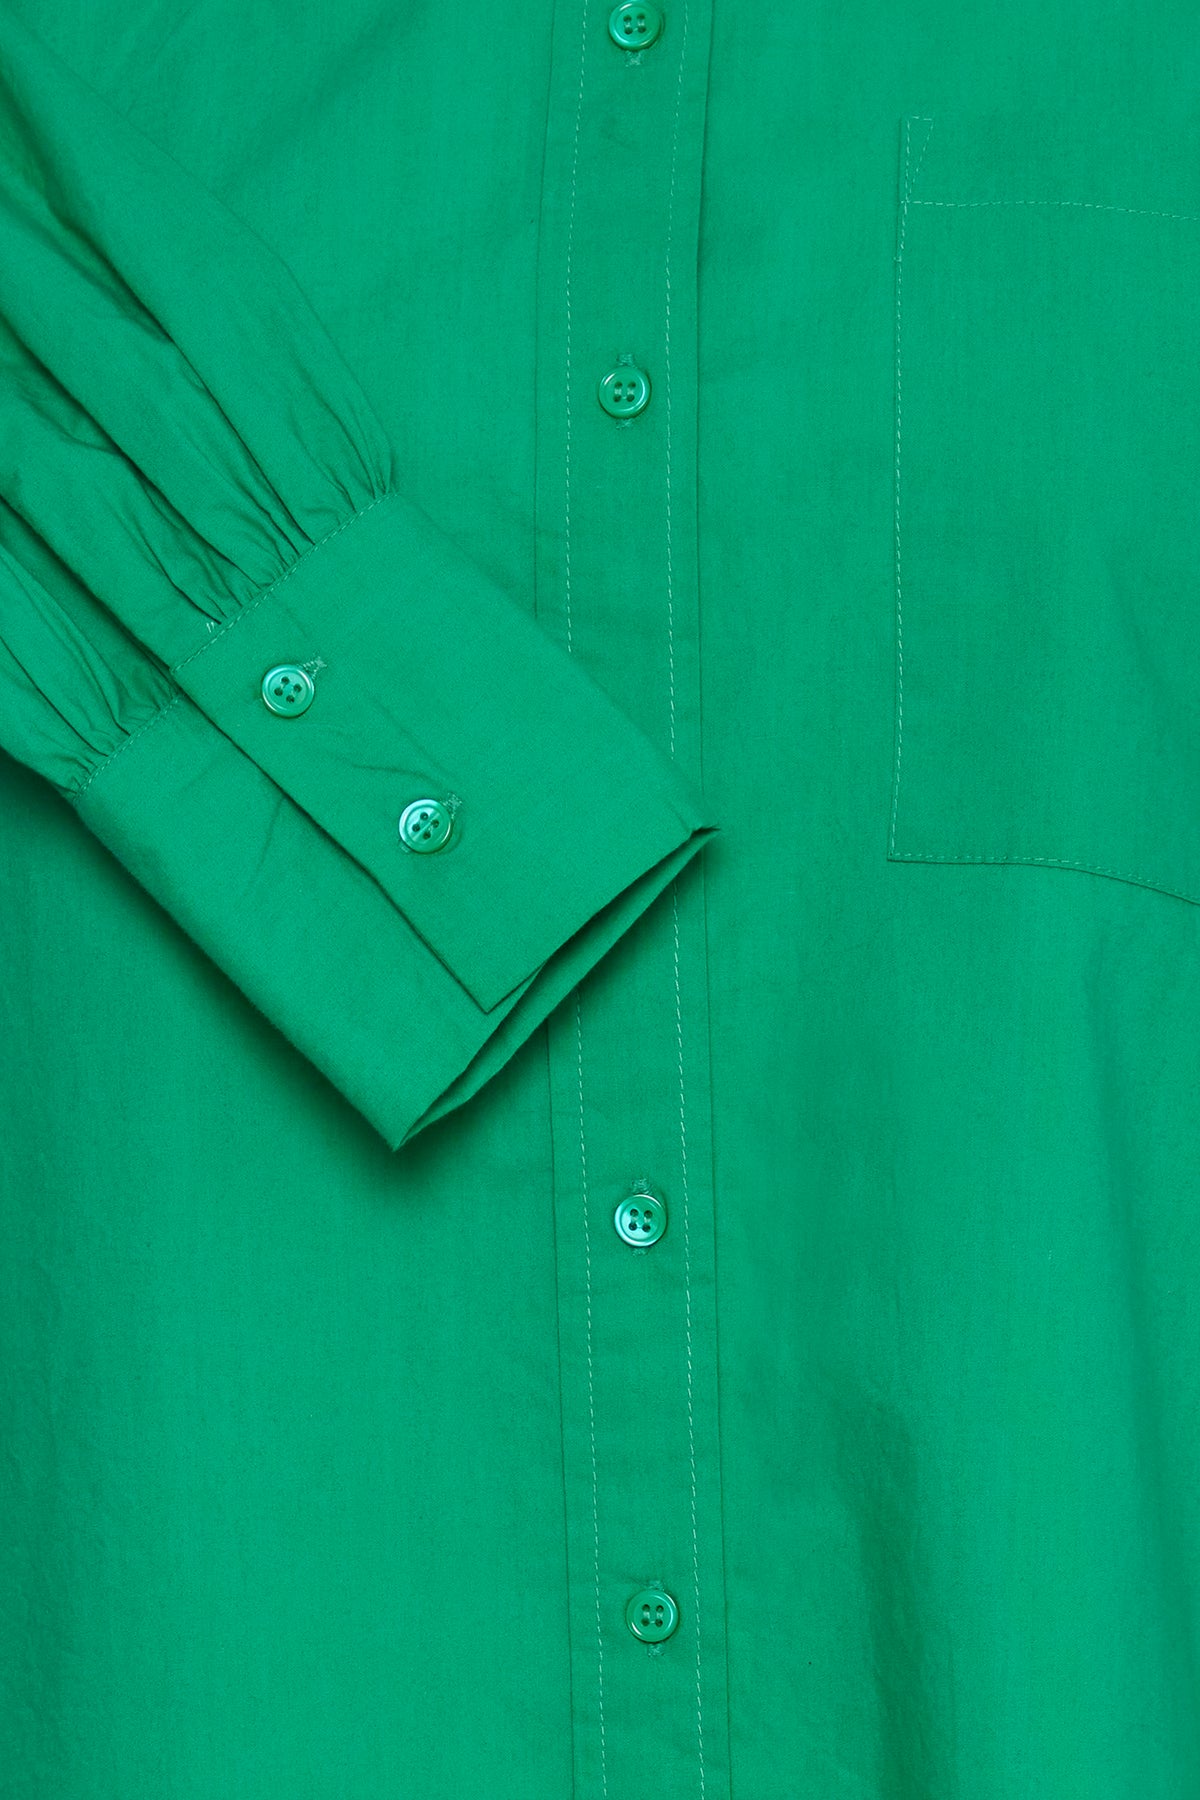 The Edith Blouse in Green